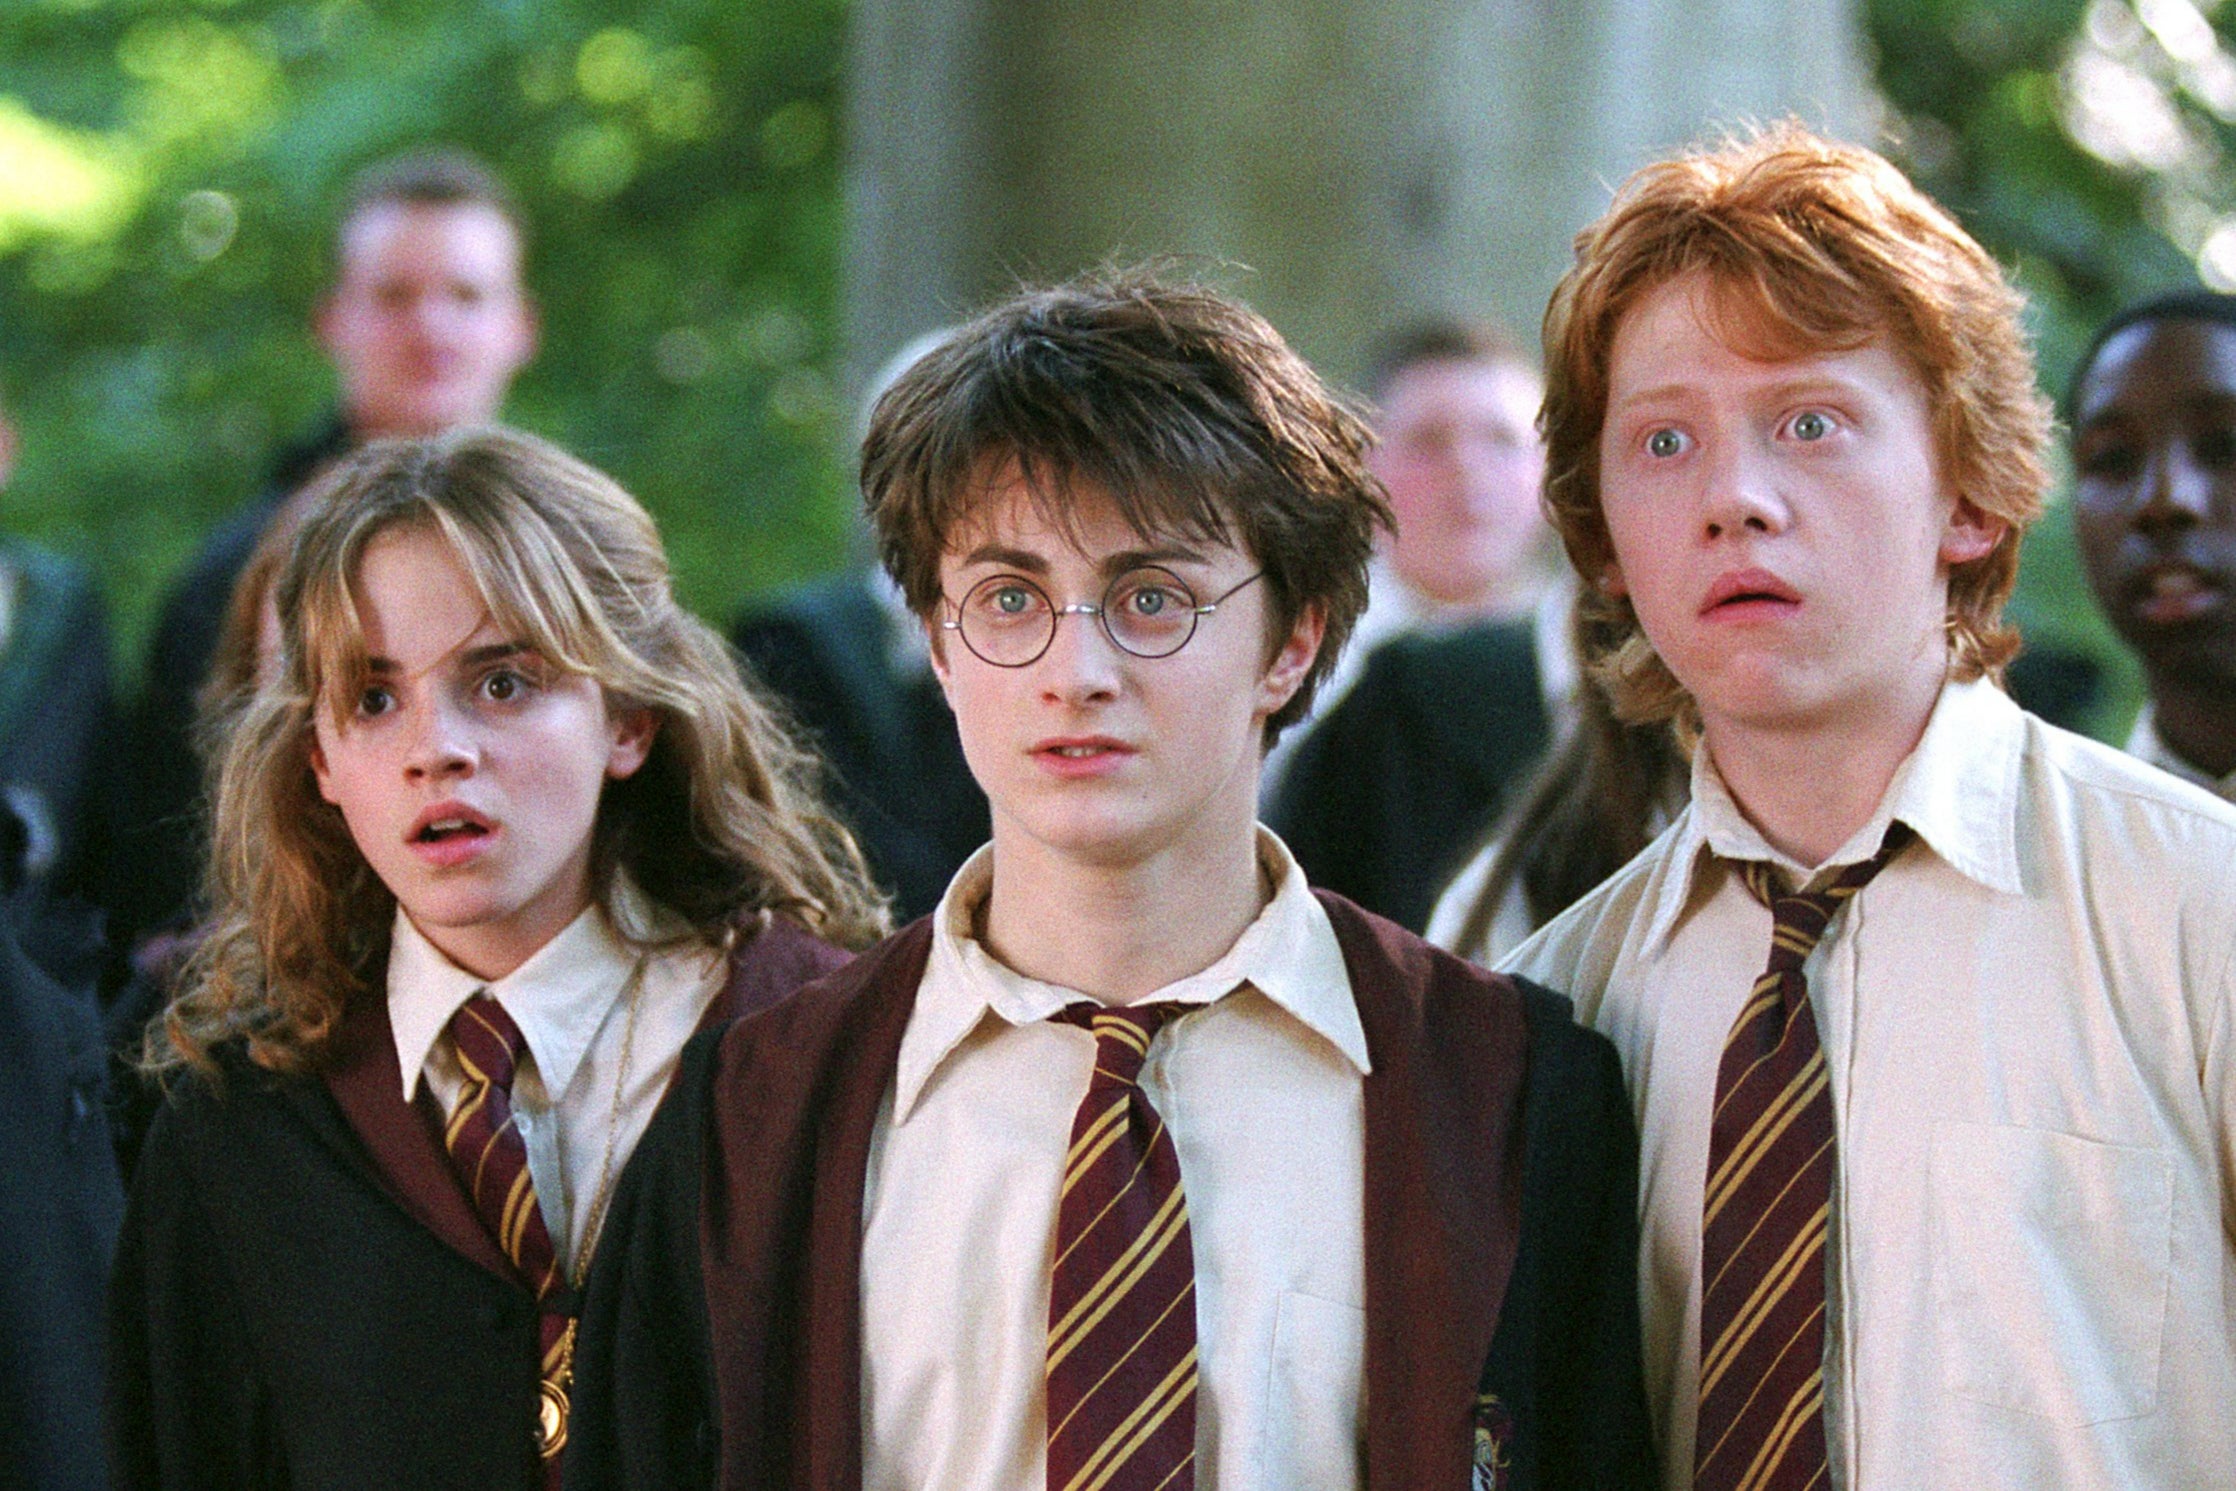 Wizards in training: Emma Watson, Daniel Radcliffe and Rupert Grint in ‘Harry Potter and the Prisoner of Azkaban’